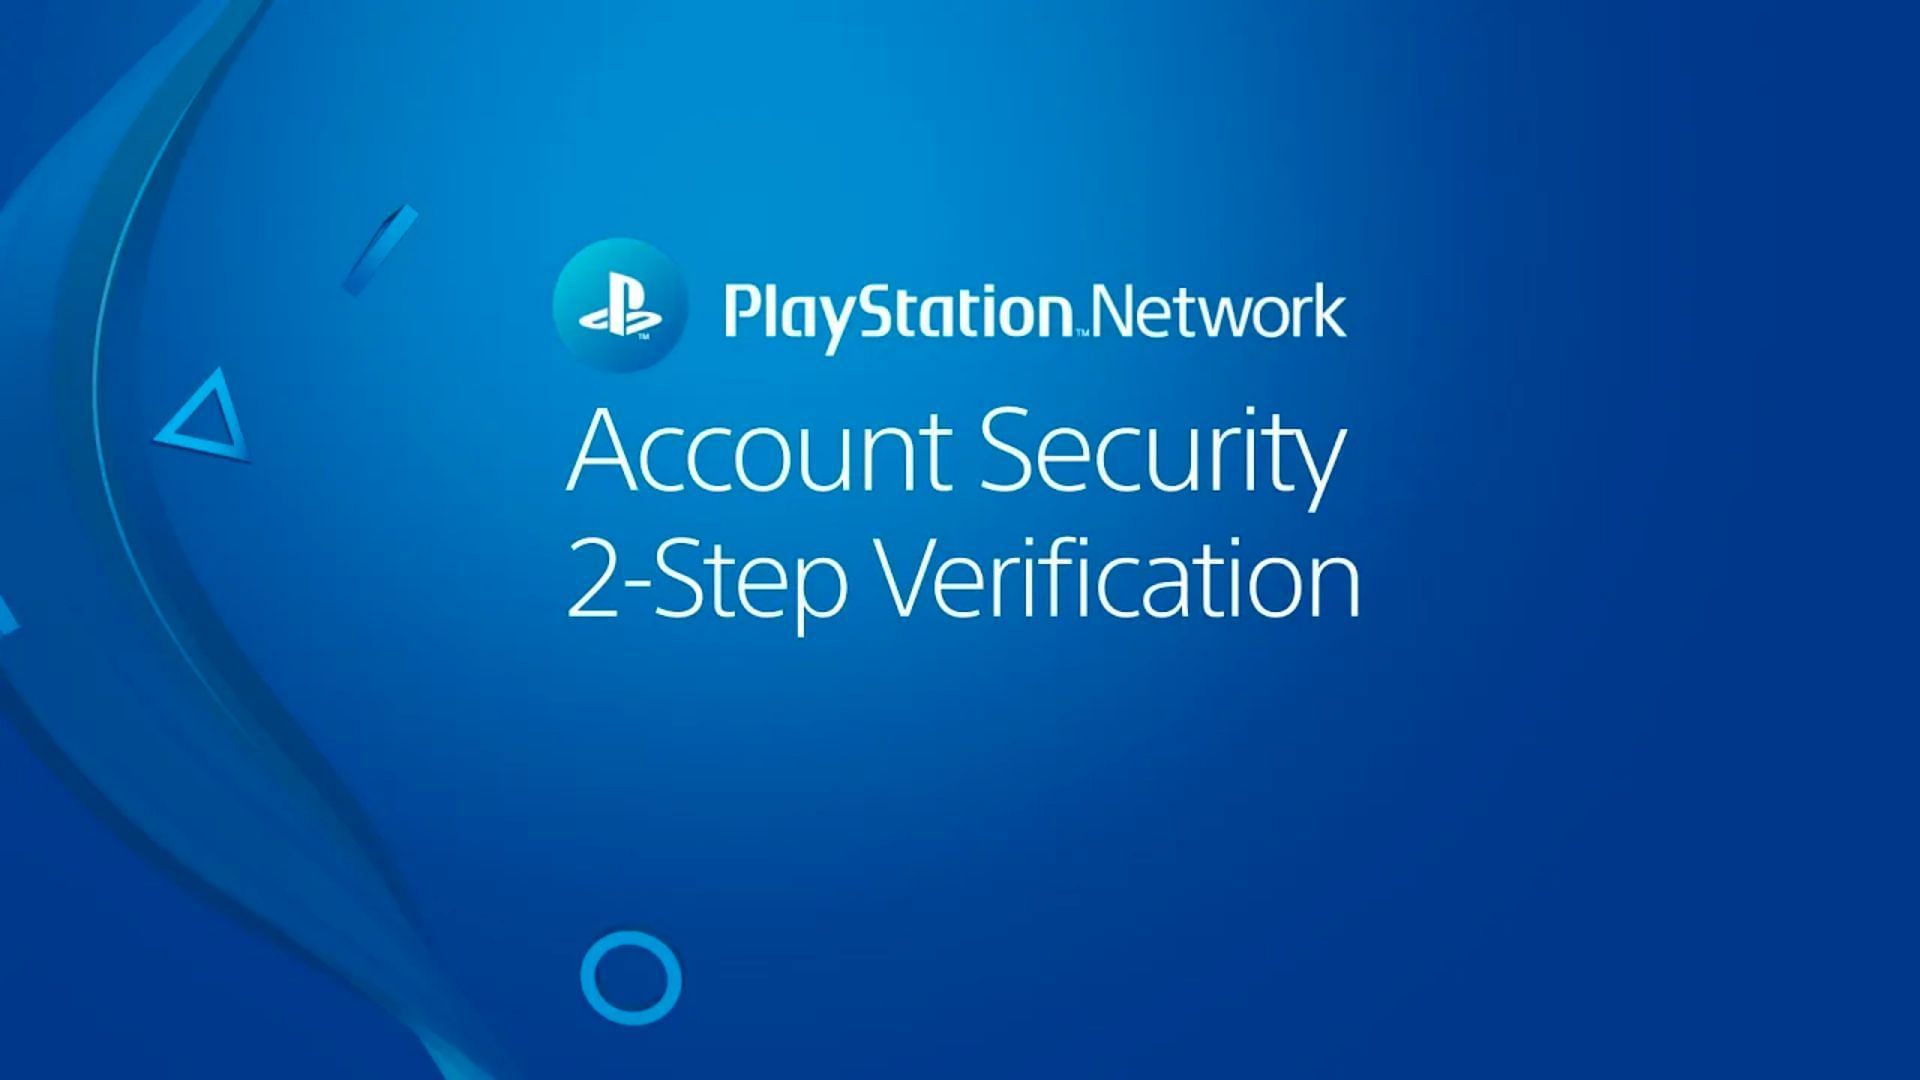 PlayStation Network has recently introduced 2-step verification which makes things harder for players from unsupported countries (Image via PlayStation)